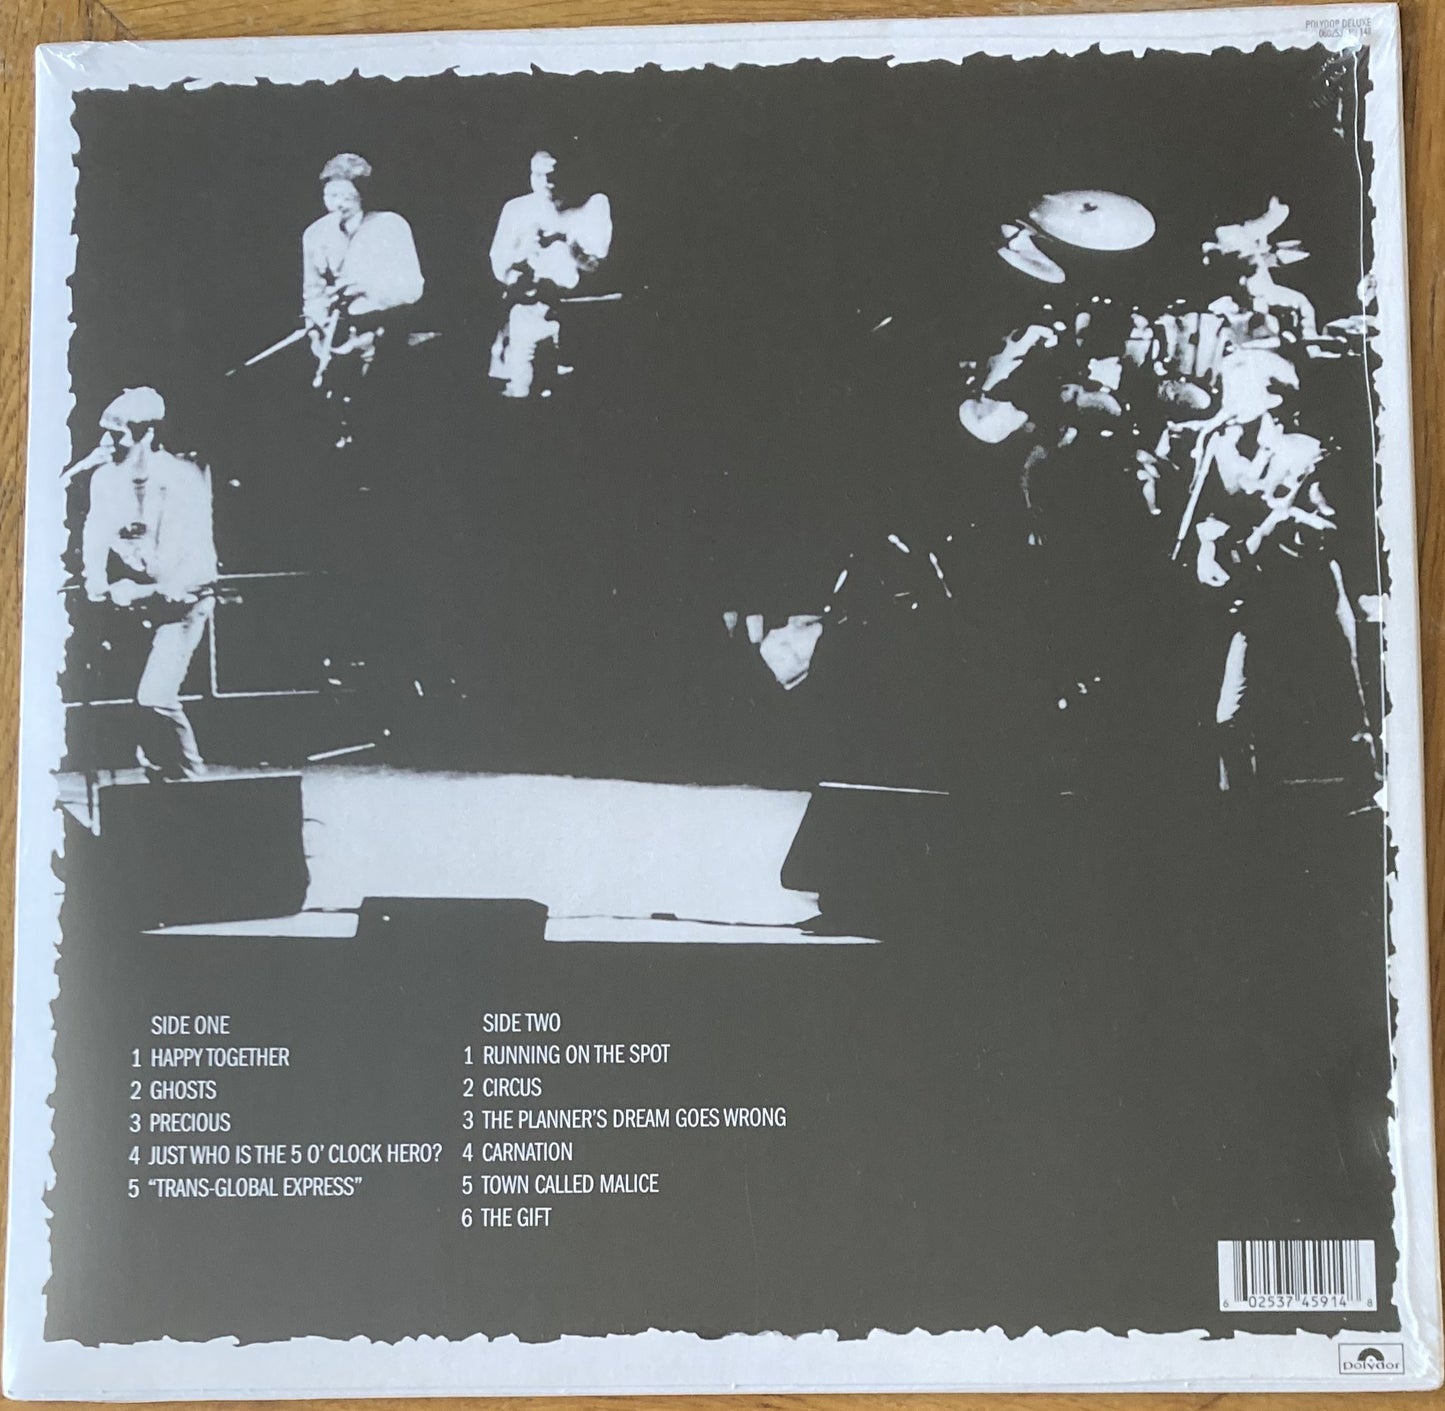 The back of 'The Jam - The Gift' on vinyl